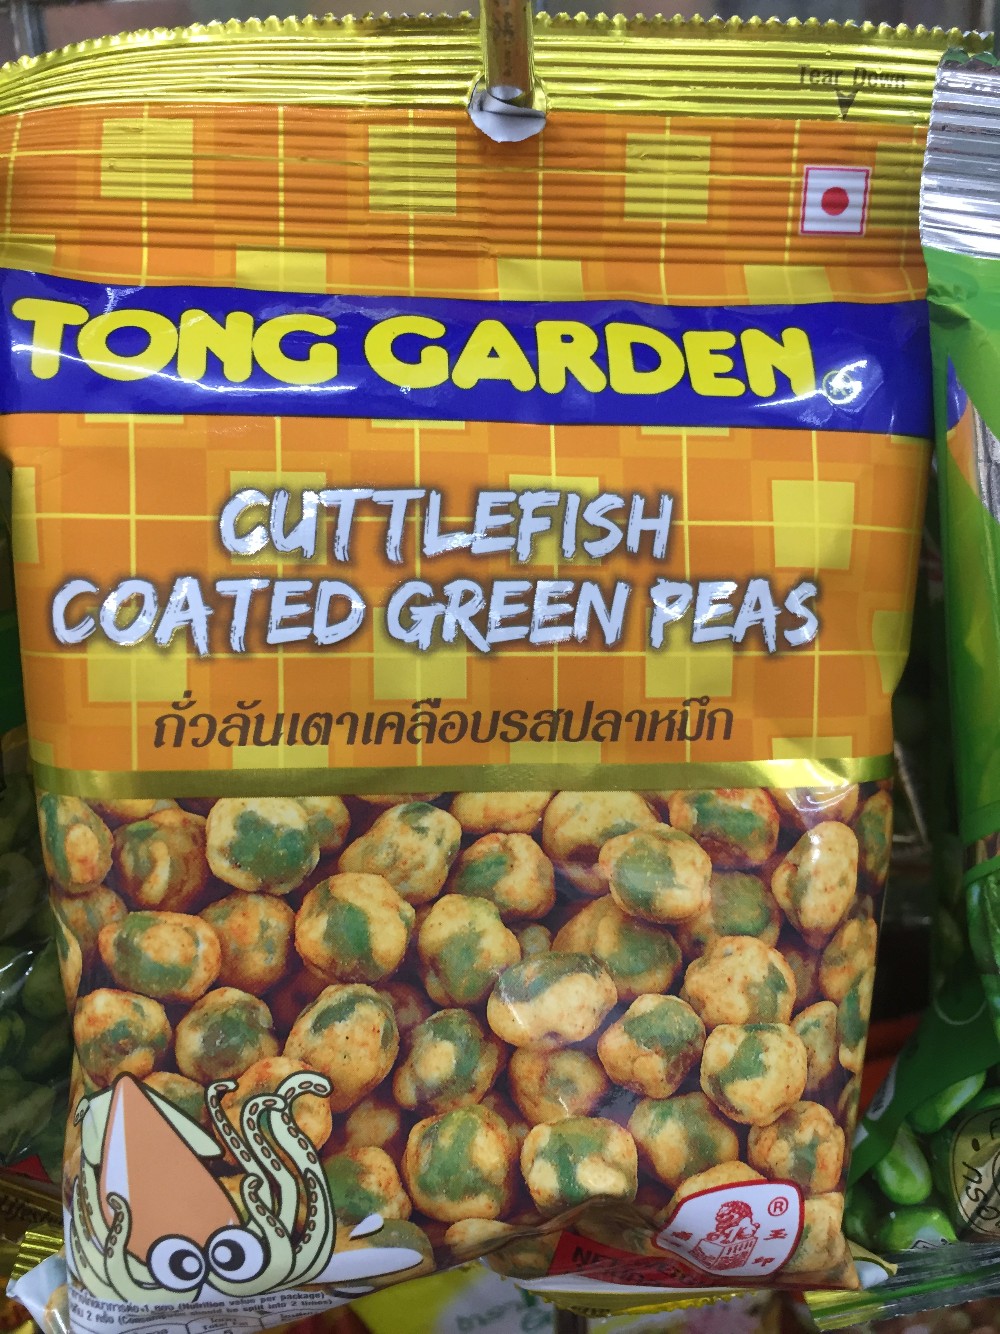 I especially like the scared-out-his-pants cuttlefish logo. Because, obviously, he's about to become a flavoring on my green peas. 